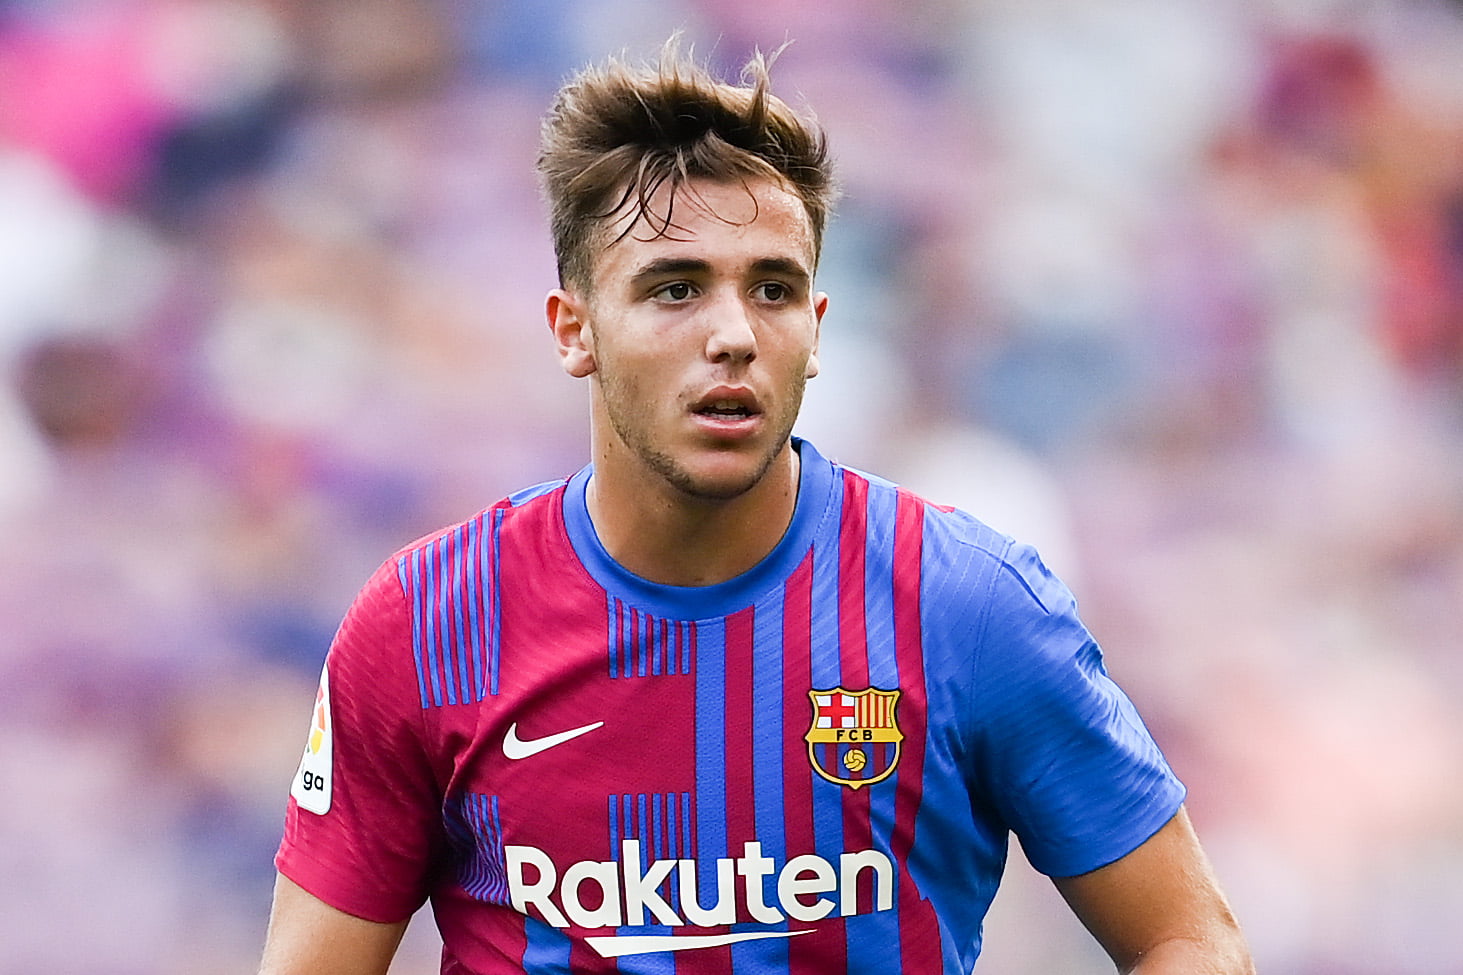 Barcelona's Nico Gonzalez is on Manchester City's radar (Barcelona's Nico Gonzalez is seen in the picture)